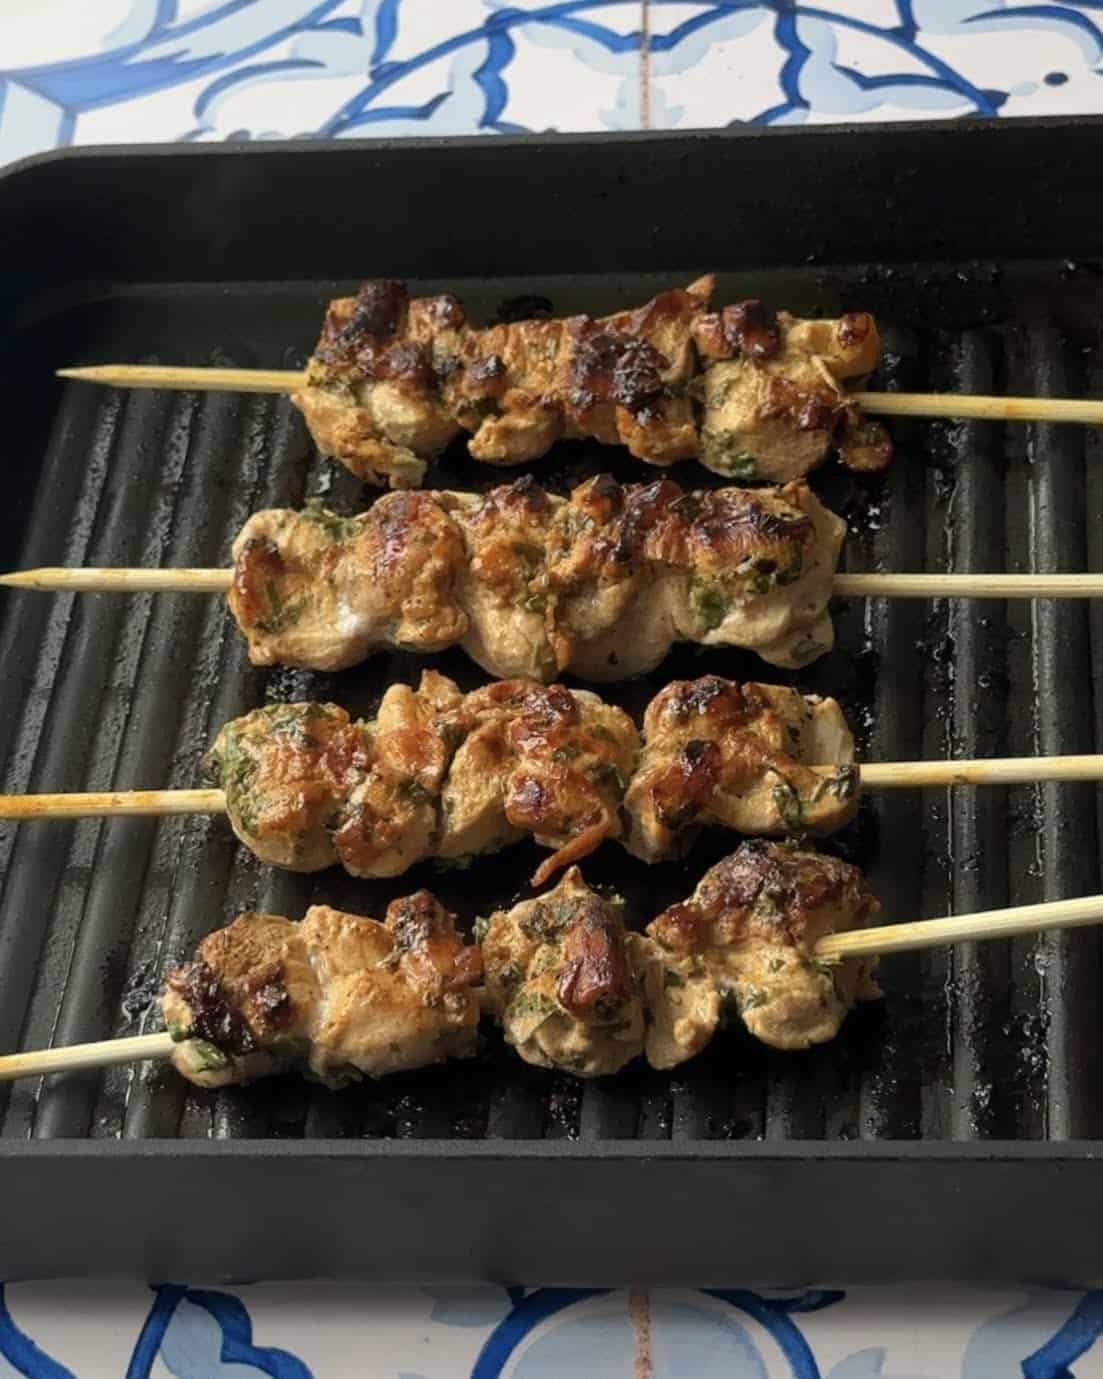 Grilled Mediterranean chicken skewers, showing their golden-brown color, cooking on the grill. The skewers are arranged in rows, with colorful char marks visible on the surface of the chicken pieces.